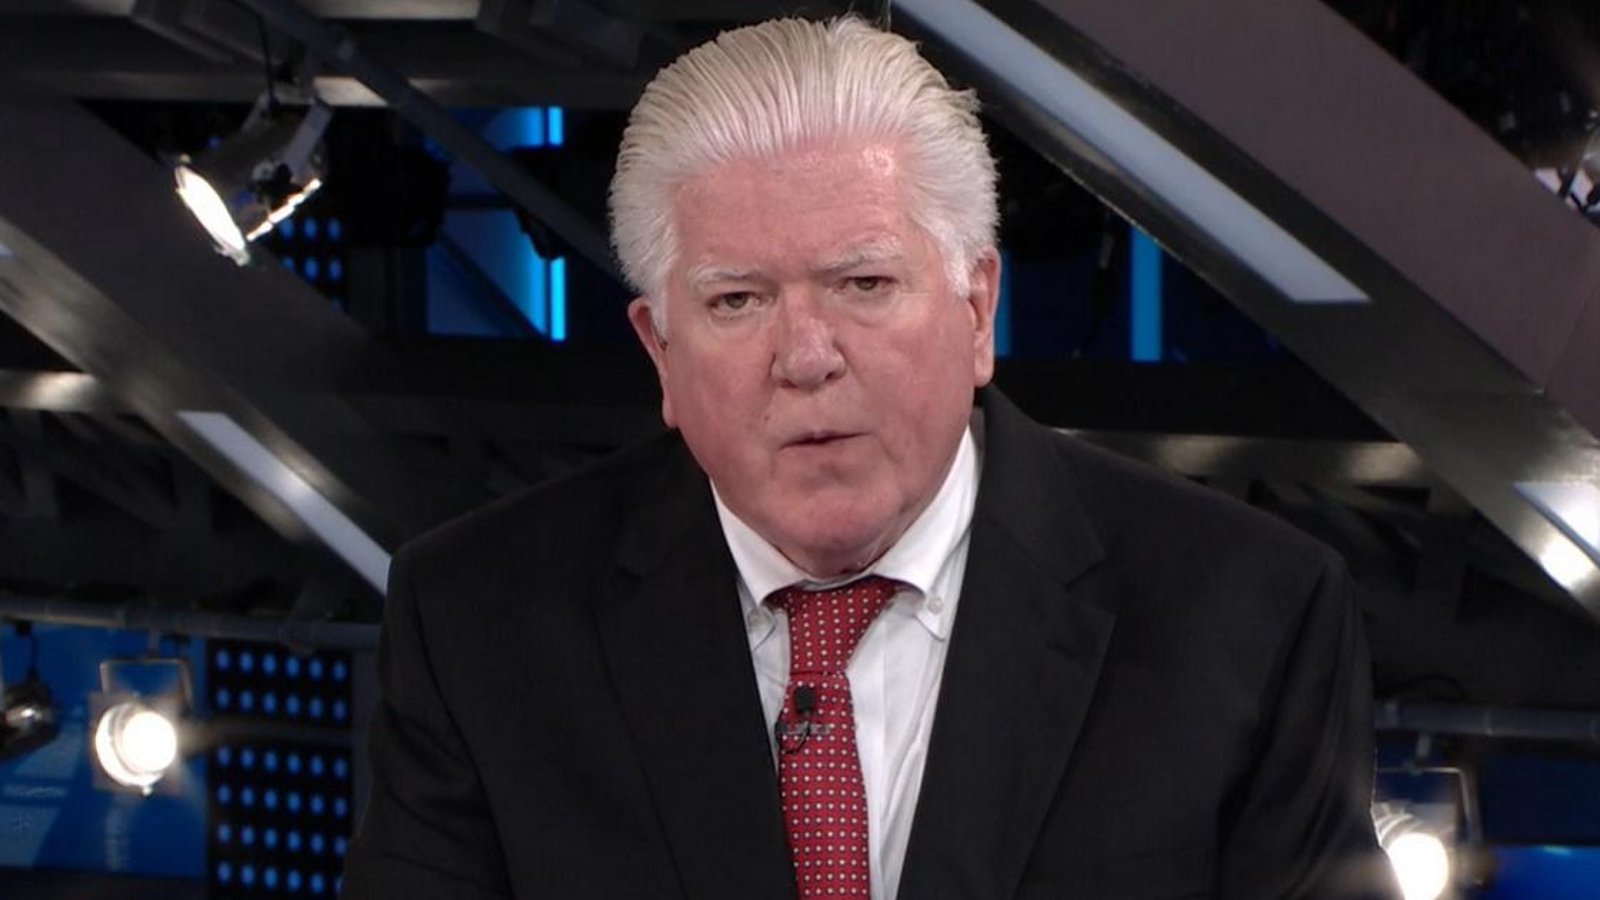 Brian Burke names his pick for the most underrated player on a Canadian team.